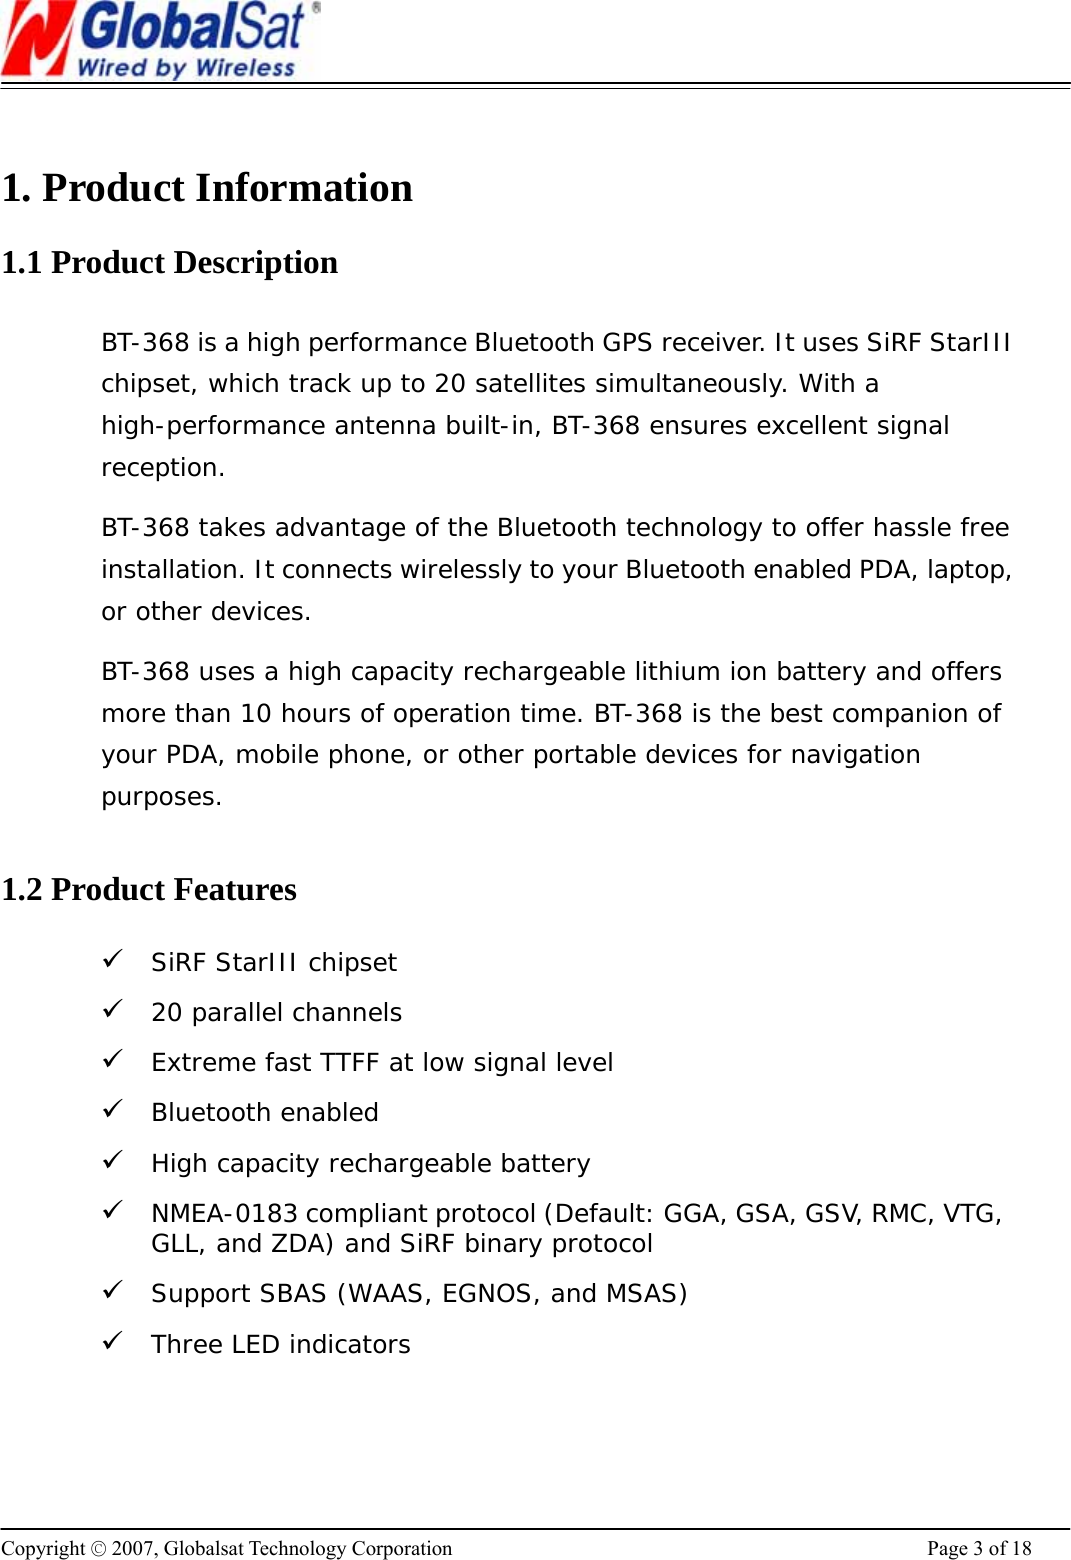                                                                      Copyright © 2007, Globalsat Technology Corporation  Page 3 of 18  1. Product Information 1.1 Product Description BT-368 is a high performance Bluetooth GPS receiver. It uses SiRF StarIII chipset, which track up to 20 satellites simultaneously. With a high-performance antenna built-in, BT-368 ensures excellent signal reception.  BT-368 takes advantage of the Bluetooth technology to offer hassle free installation. It connects wirelessly to your Bluetooth enabled PDA, laptop, or other devices.  BT-368 uses a high capacity rechargeable lithium ion battery and offers more than 10 hours of operation time. BT-368 is the best companion of your PDA, mobile phone, or other portable devices for navigation purposes.   1.2 Product Features 9 SiRF StarIII chipset 9 20 parallel channels 9 Extreme fast TTFF at low signal level 9 Bluetooth enabled 9 High capacity rechargeable battery 9 NMEA-0183 compliant protocol (Default: GGA, GSA, GSV, RMC, VTG, GLL, and ZDA) and SiRF binary protocol 9 Support SBAS (WAAS, EGNOS, and MSAS)  9 Three LED indicators  